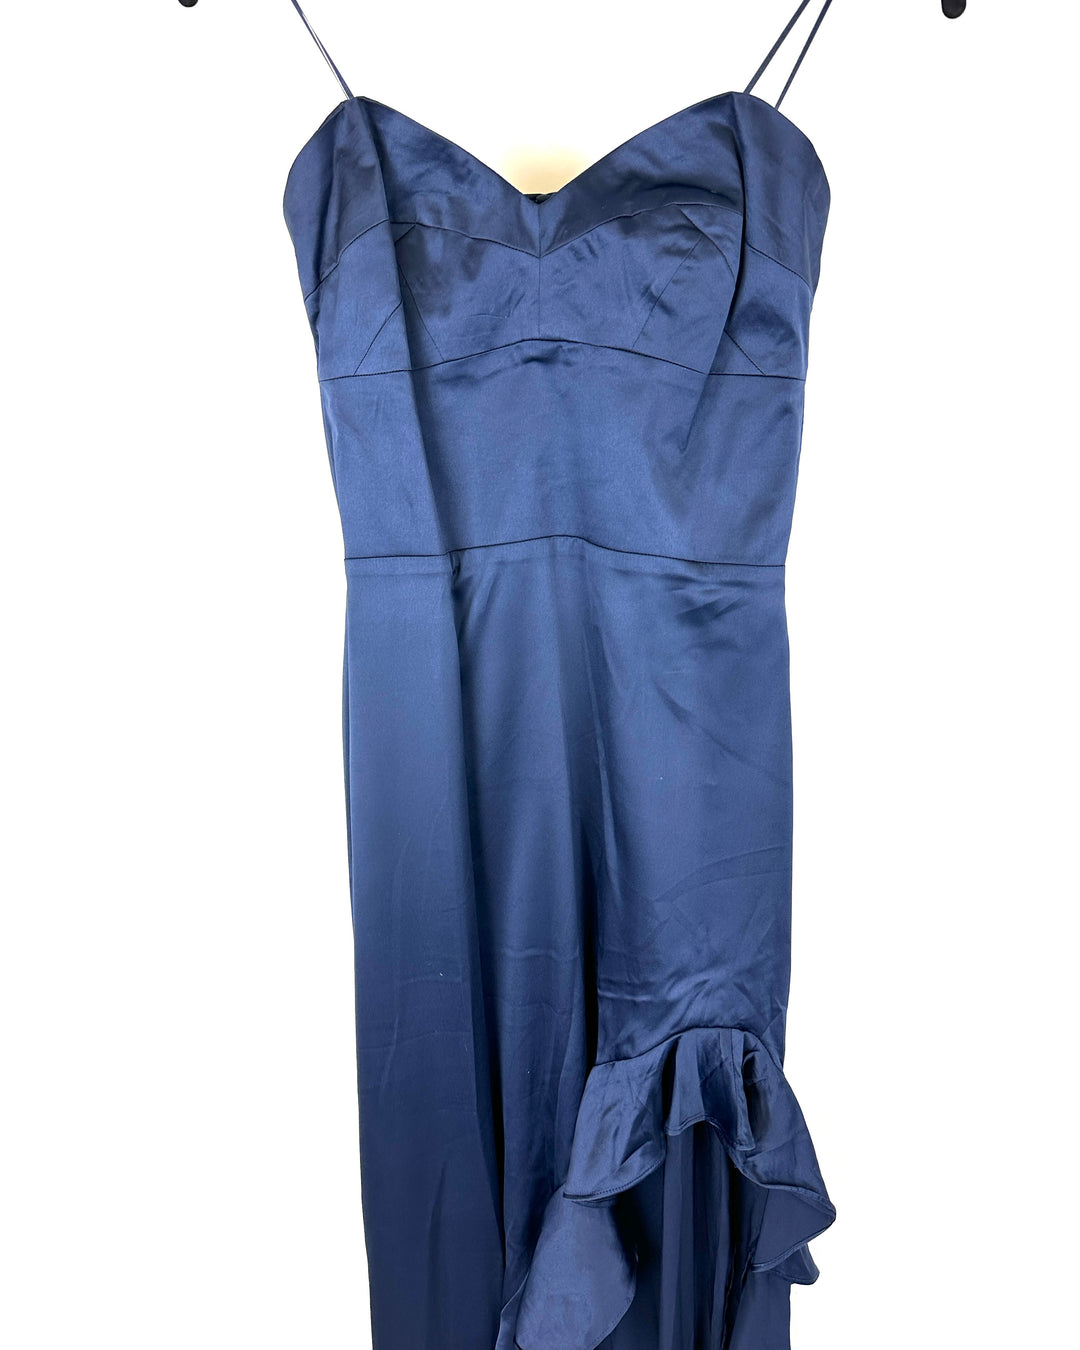 Navy Blue Strapless Gown - Small, Medium and Extra Large